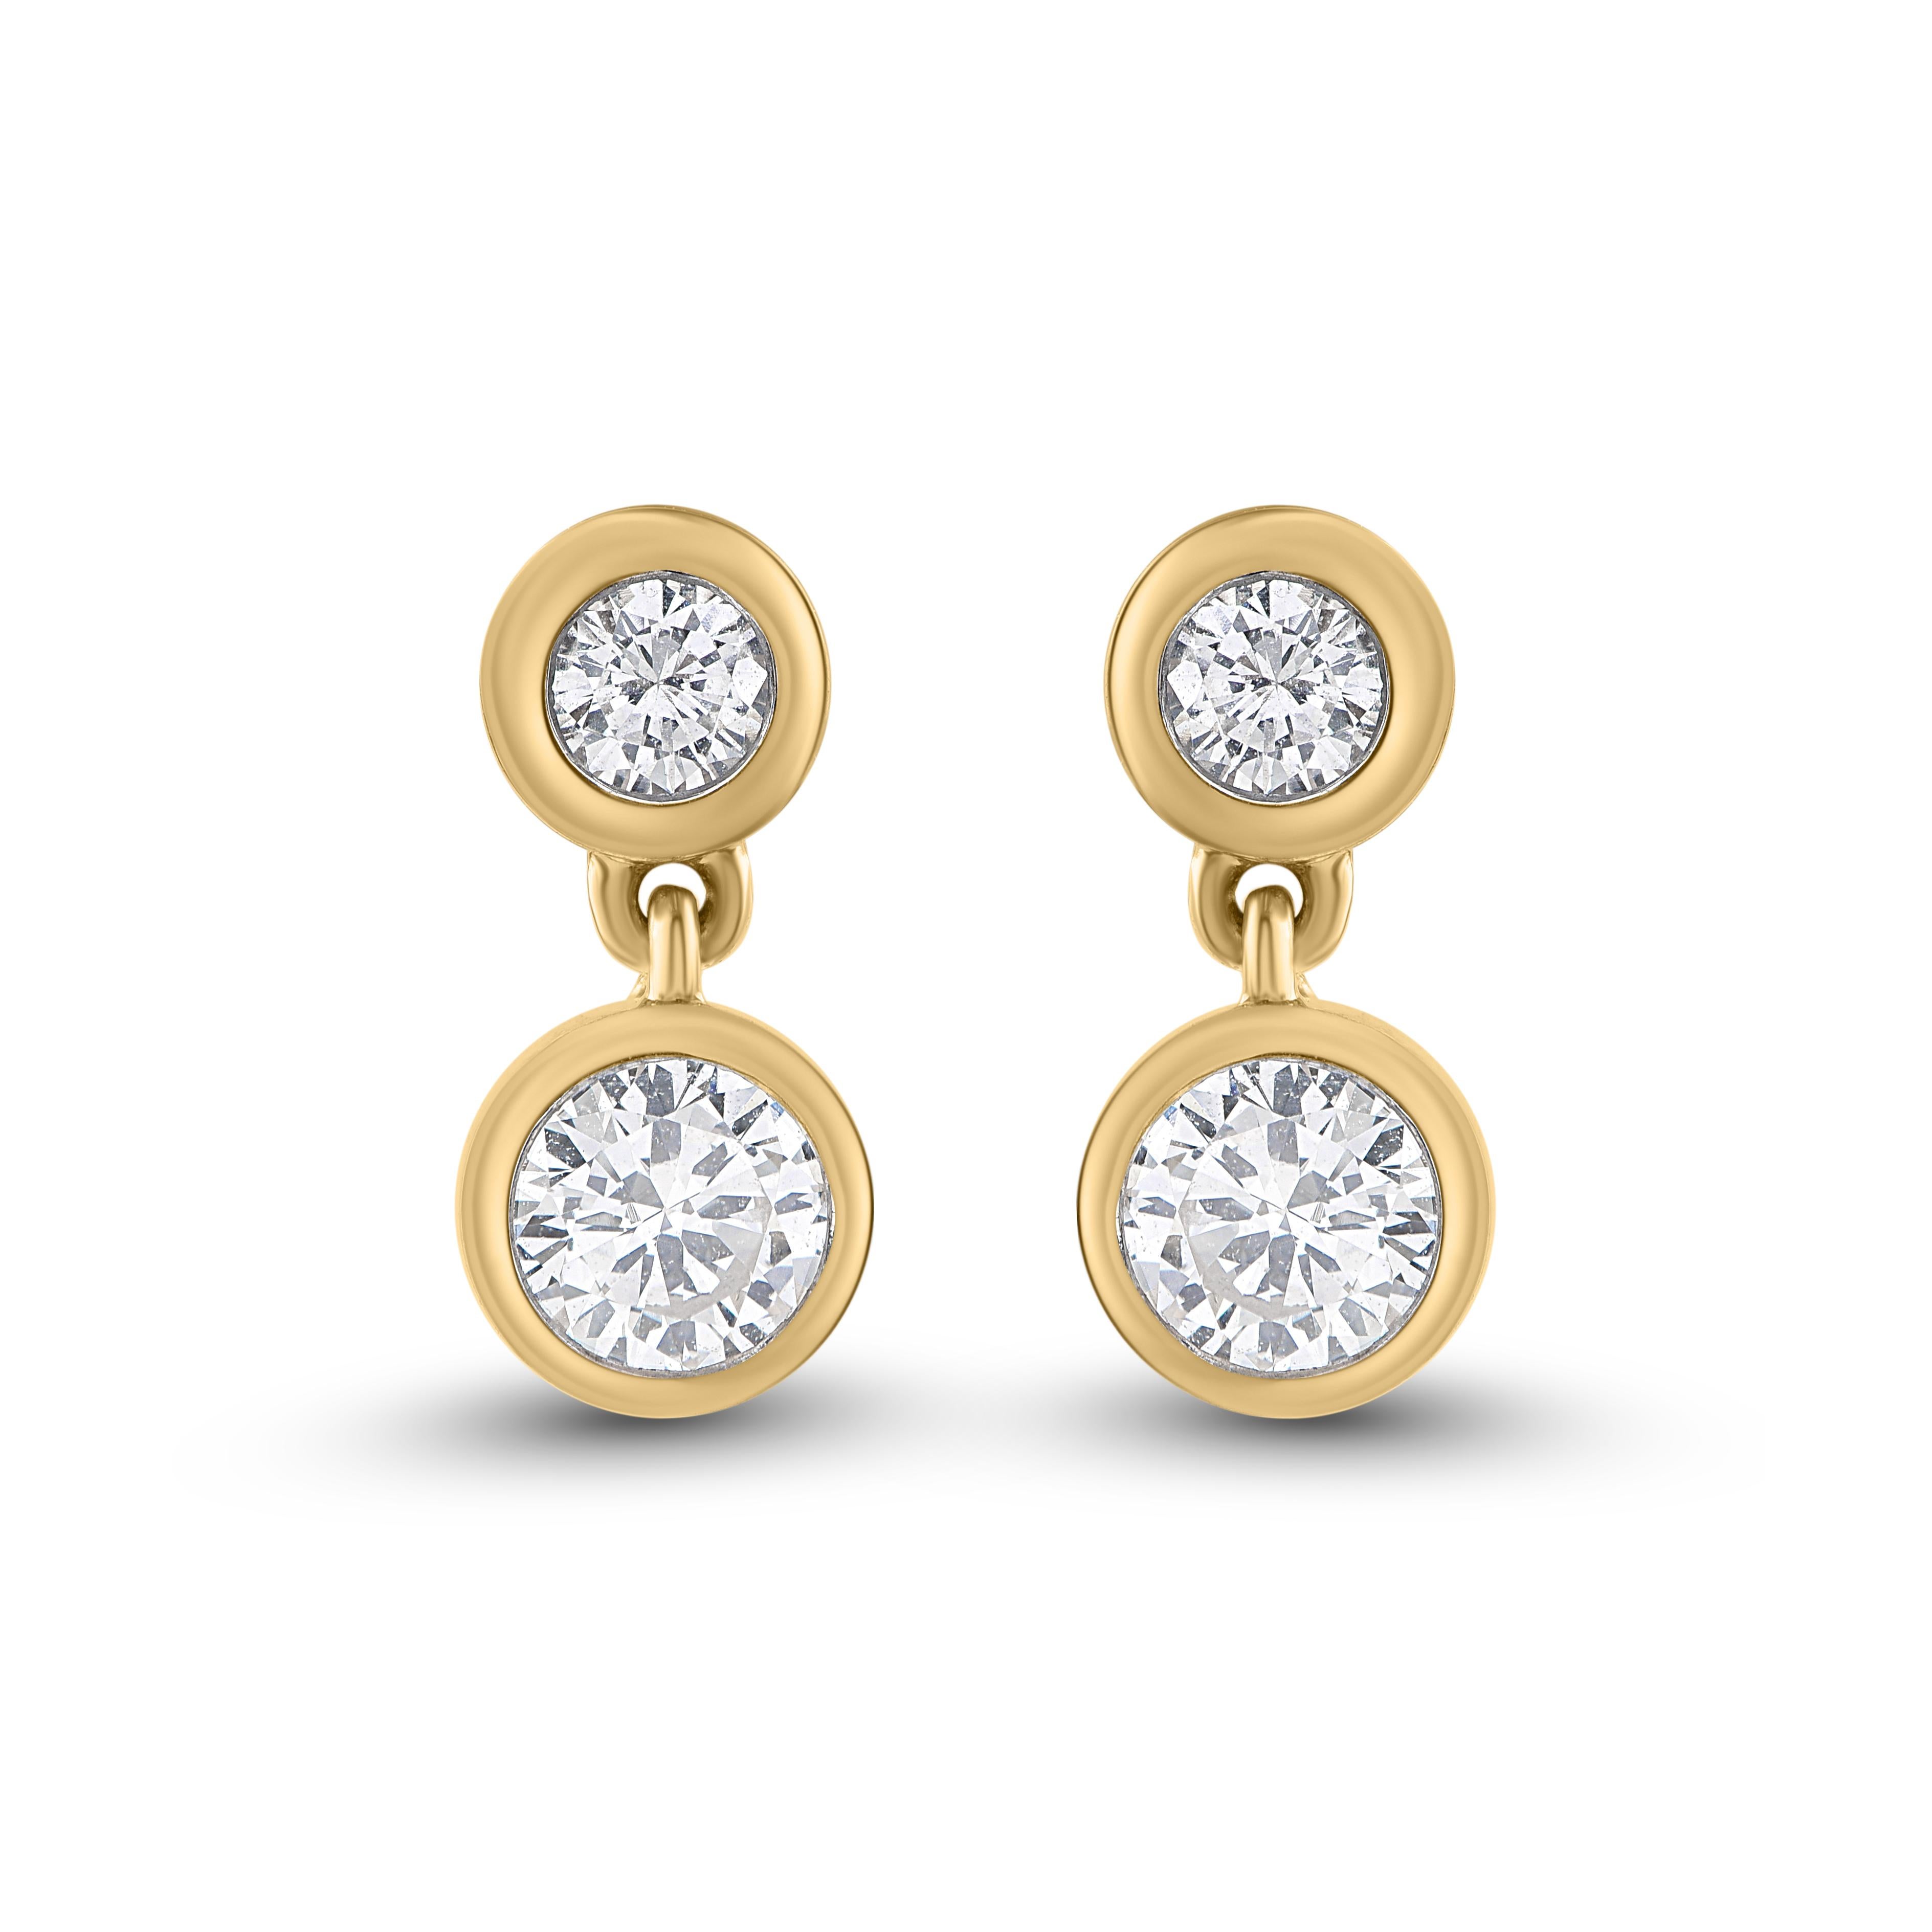 Add a sparkling touch with these dainty drop earrings. Diamond studded drop earrings in 18 karat yellow gold, buffed to a brilliant lustre, these earrings secure easily with post back. Diamonds are graded H-I Color, SI3 Clarity. 
